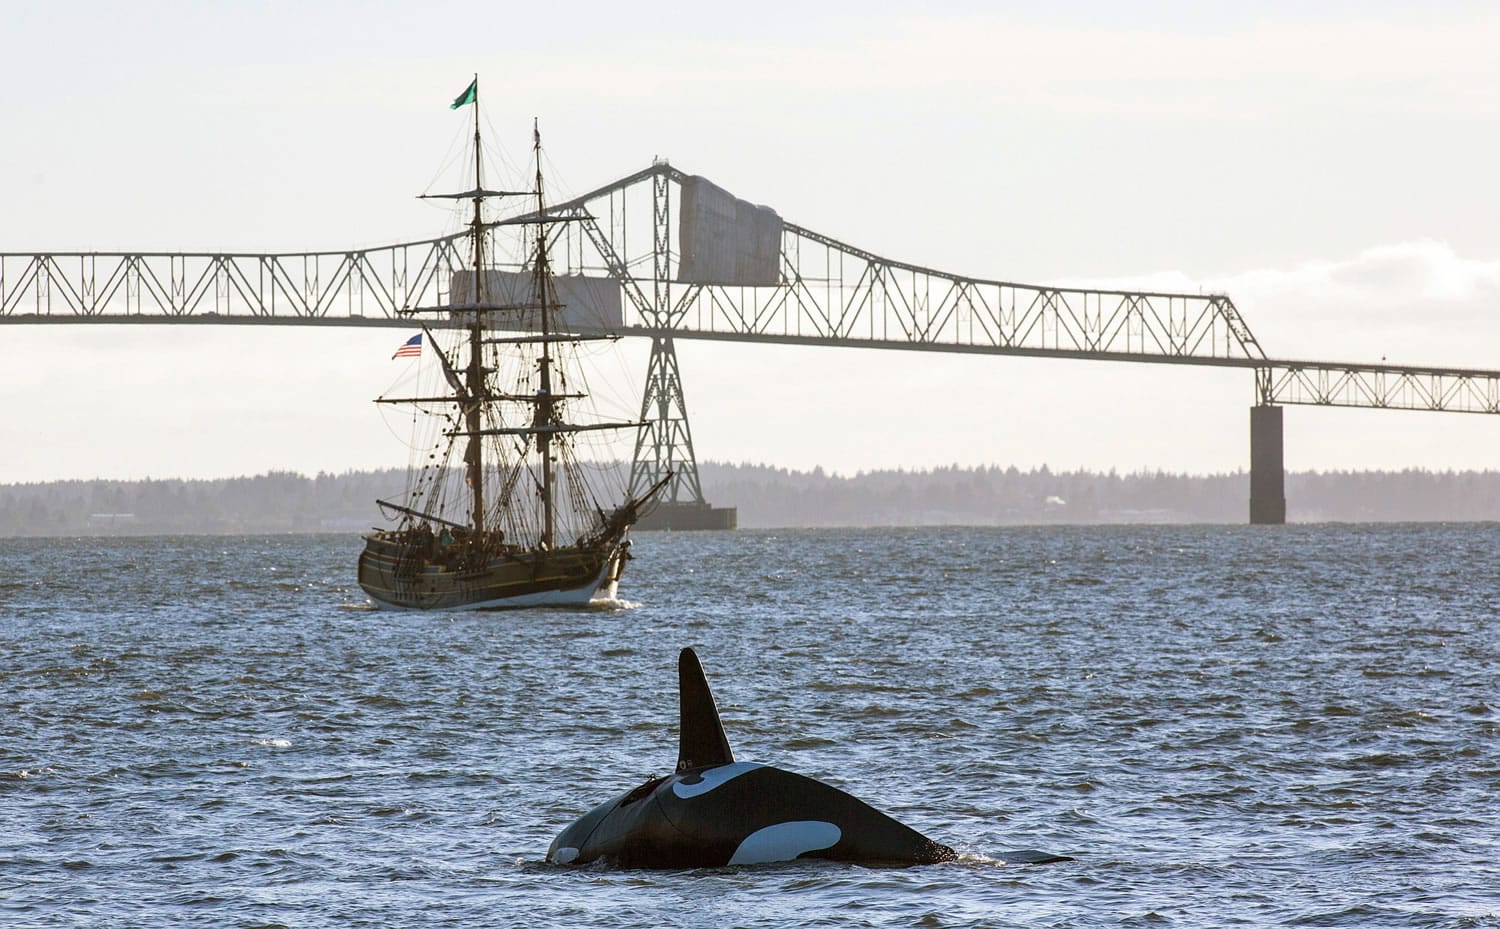 The fake life-sized fiberglass orca passes the Lady Washington as it continues down the Columbia River toward the East End Mooring Basin on Thursday in Astoria, Ore.